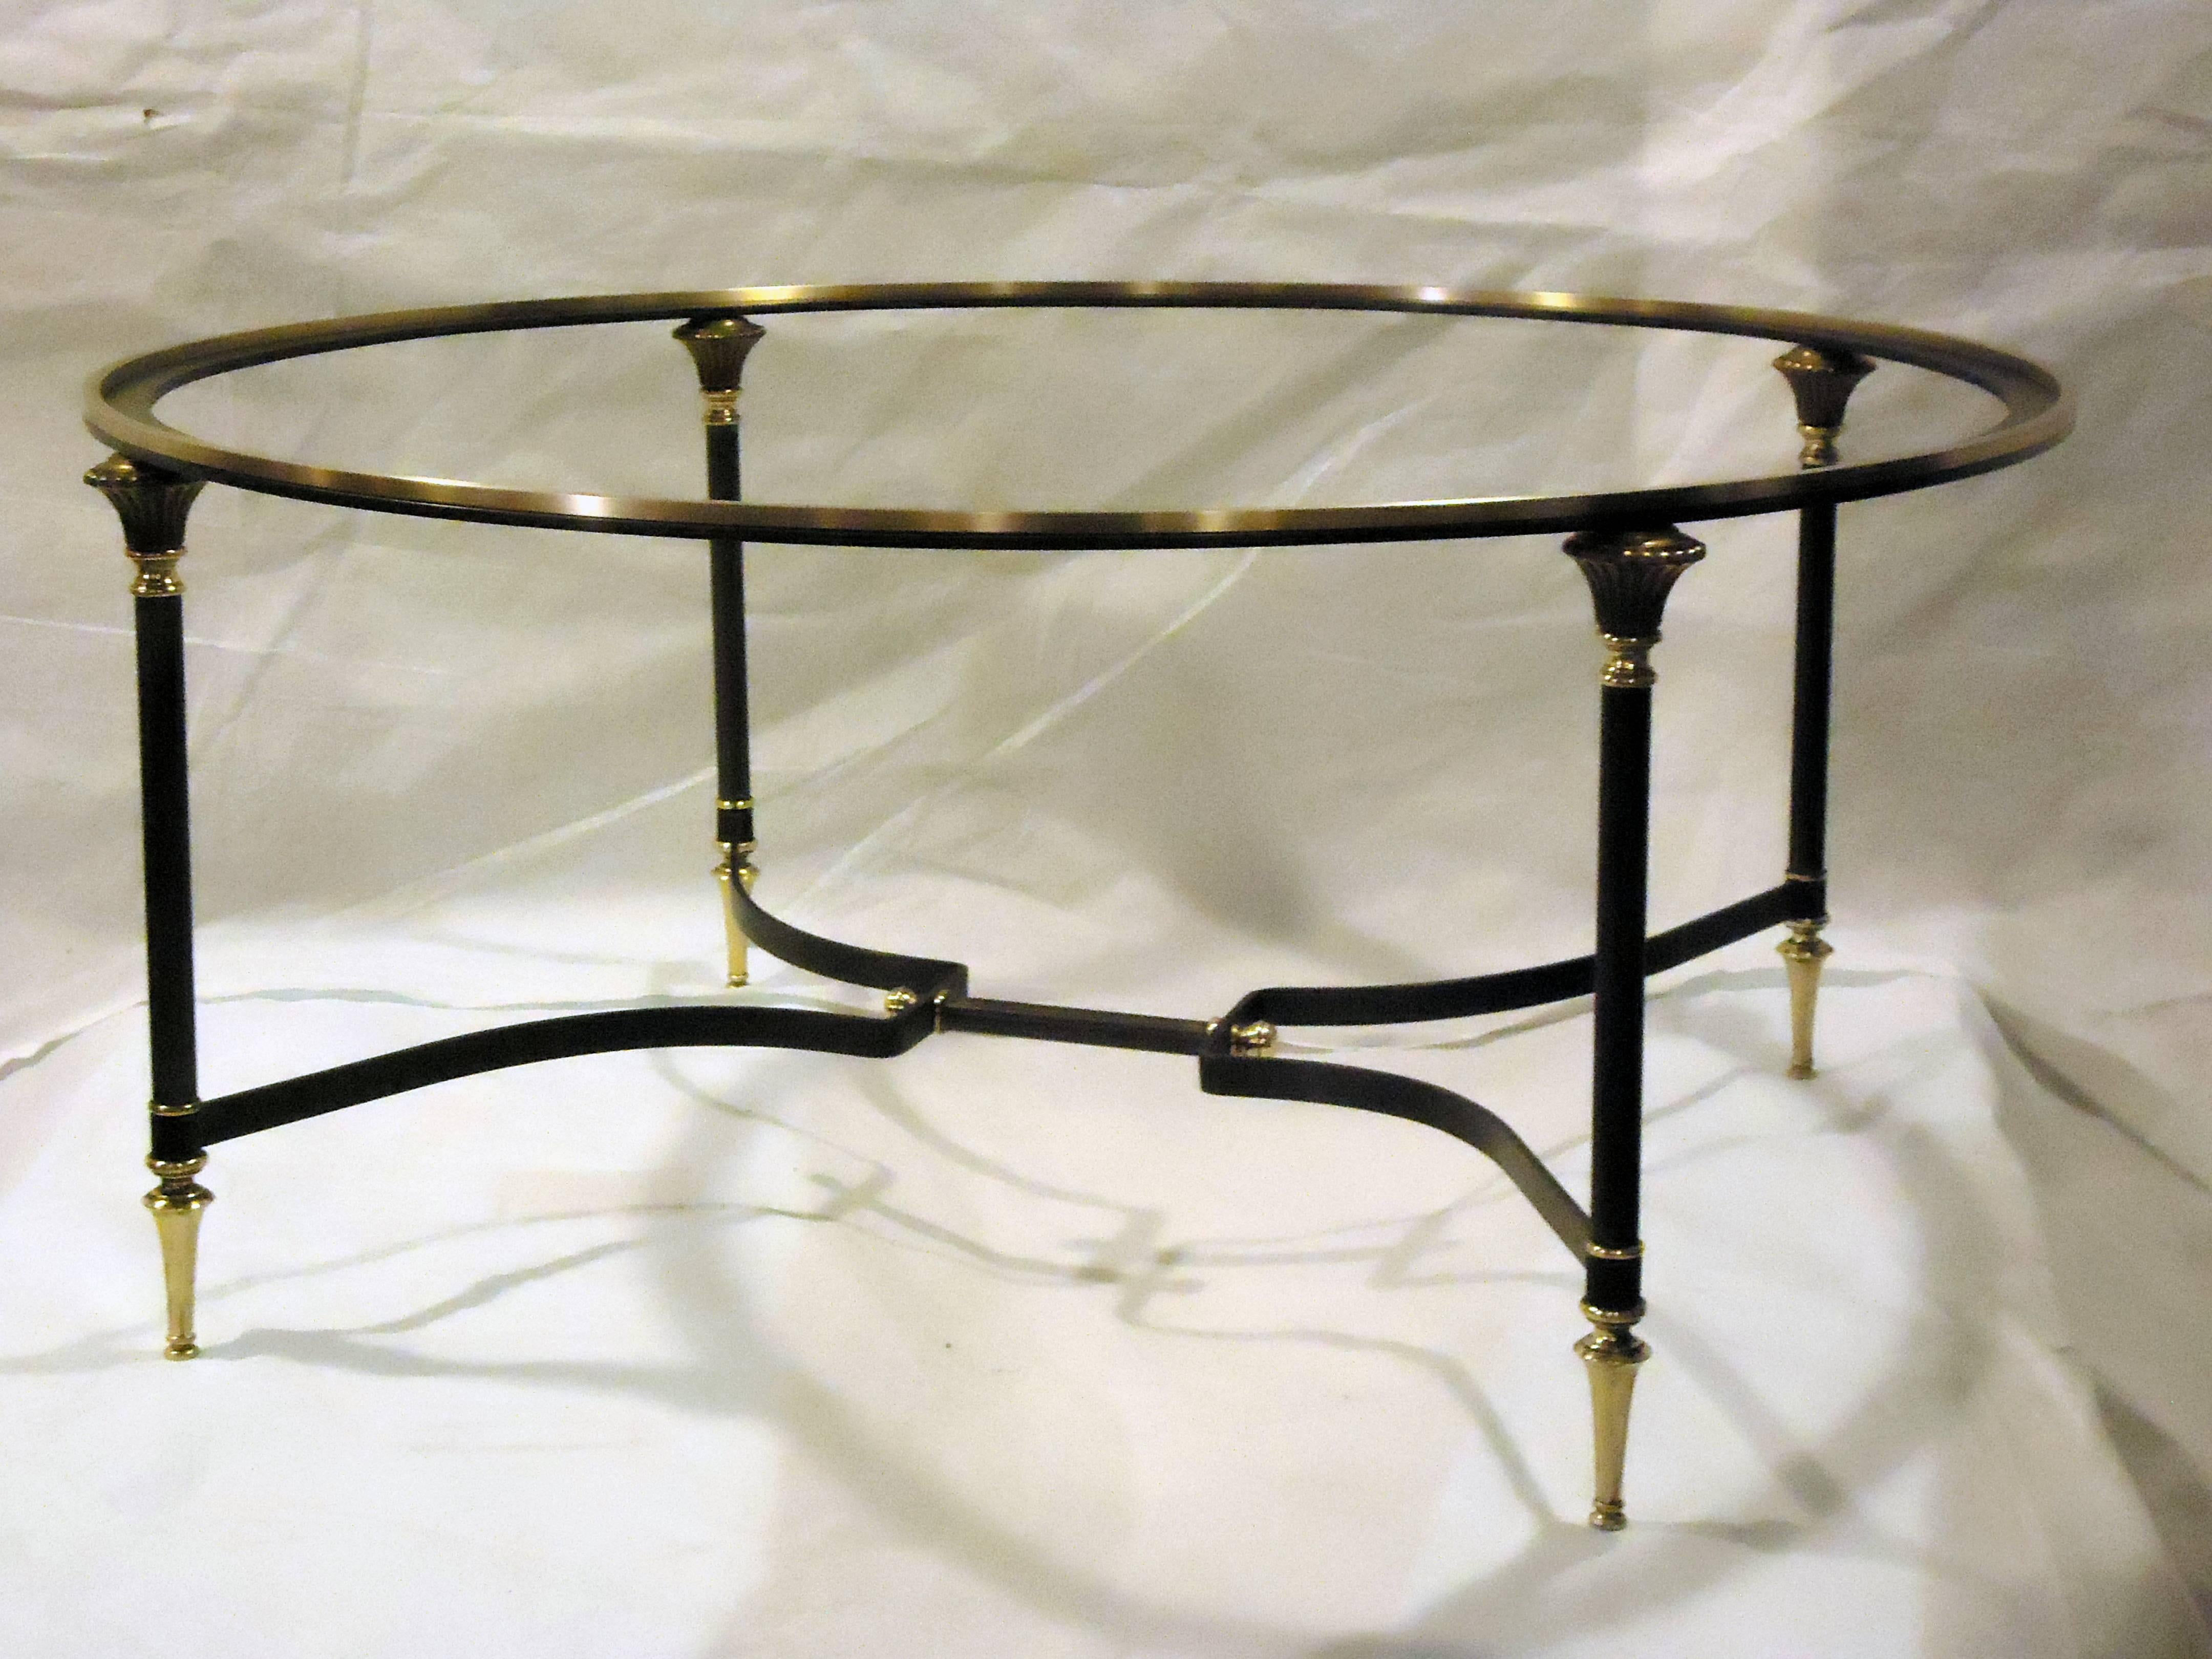 Mid-Century Modern Neoclassical Coffee Table Italian Glass Insert Bronze and Brushed Steel  1950s